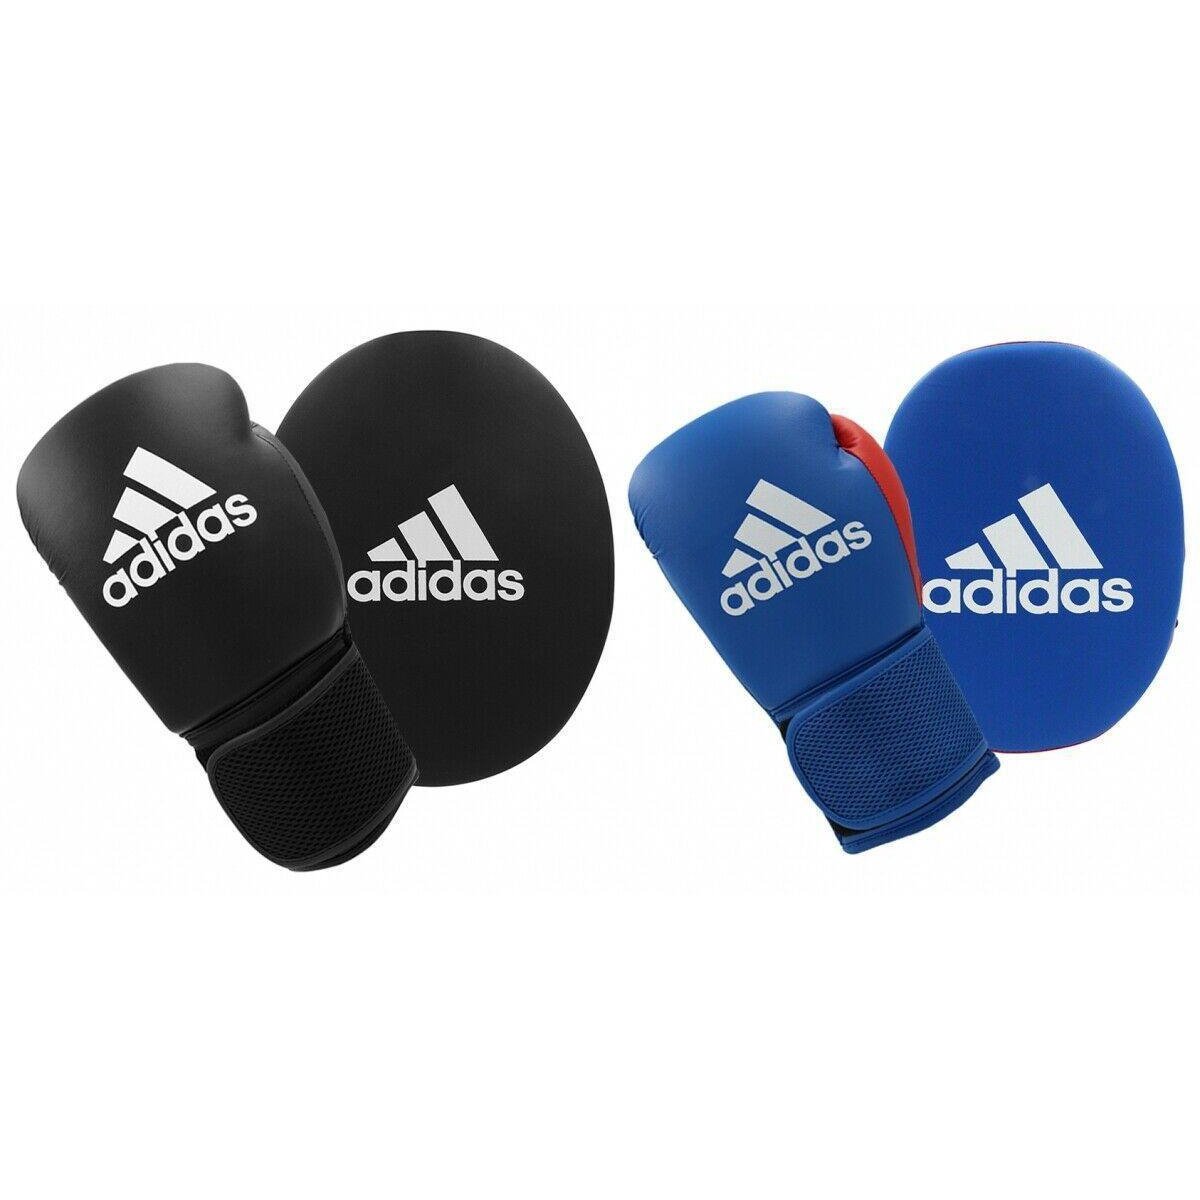 adidas Boxing Gloves & Focus Mitts Beginners Set Kids Adults